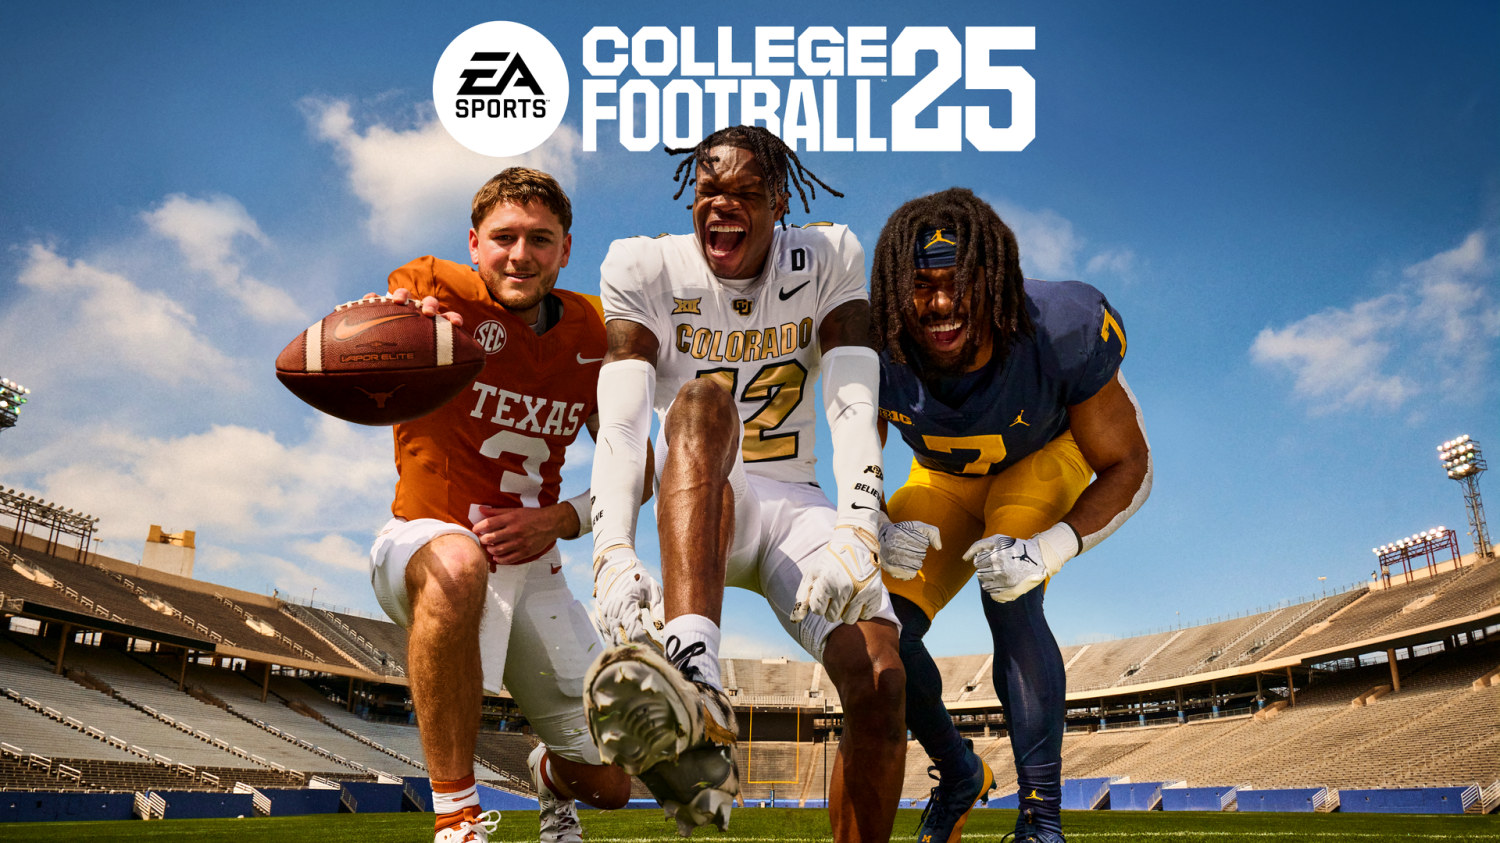 EA dominates PlayStation Store as EA Sports College Football 25 tops best-sellers charts